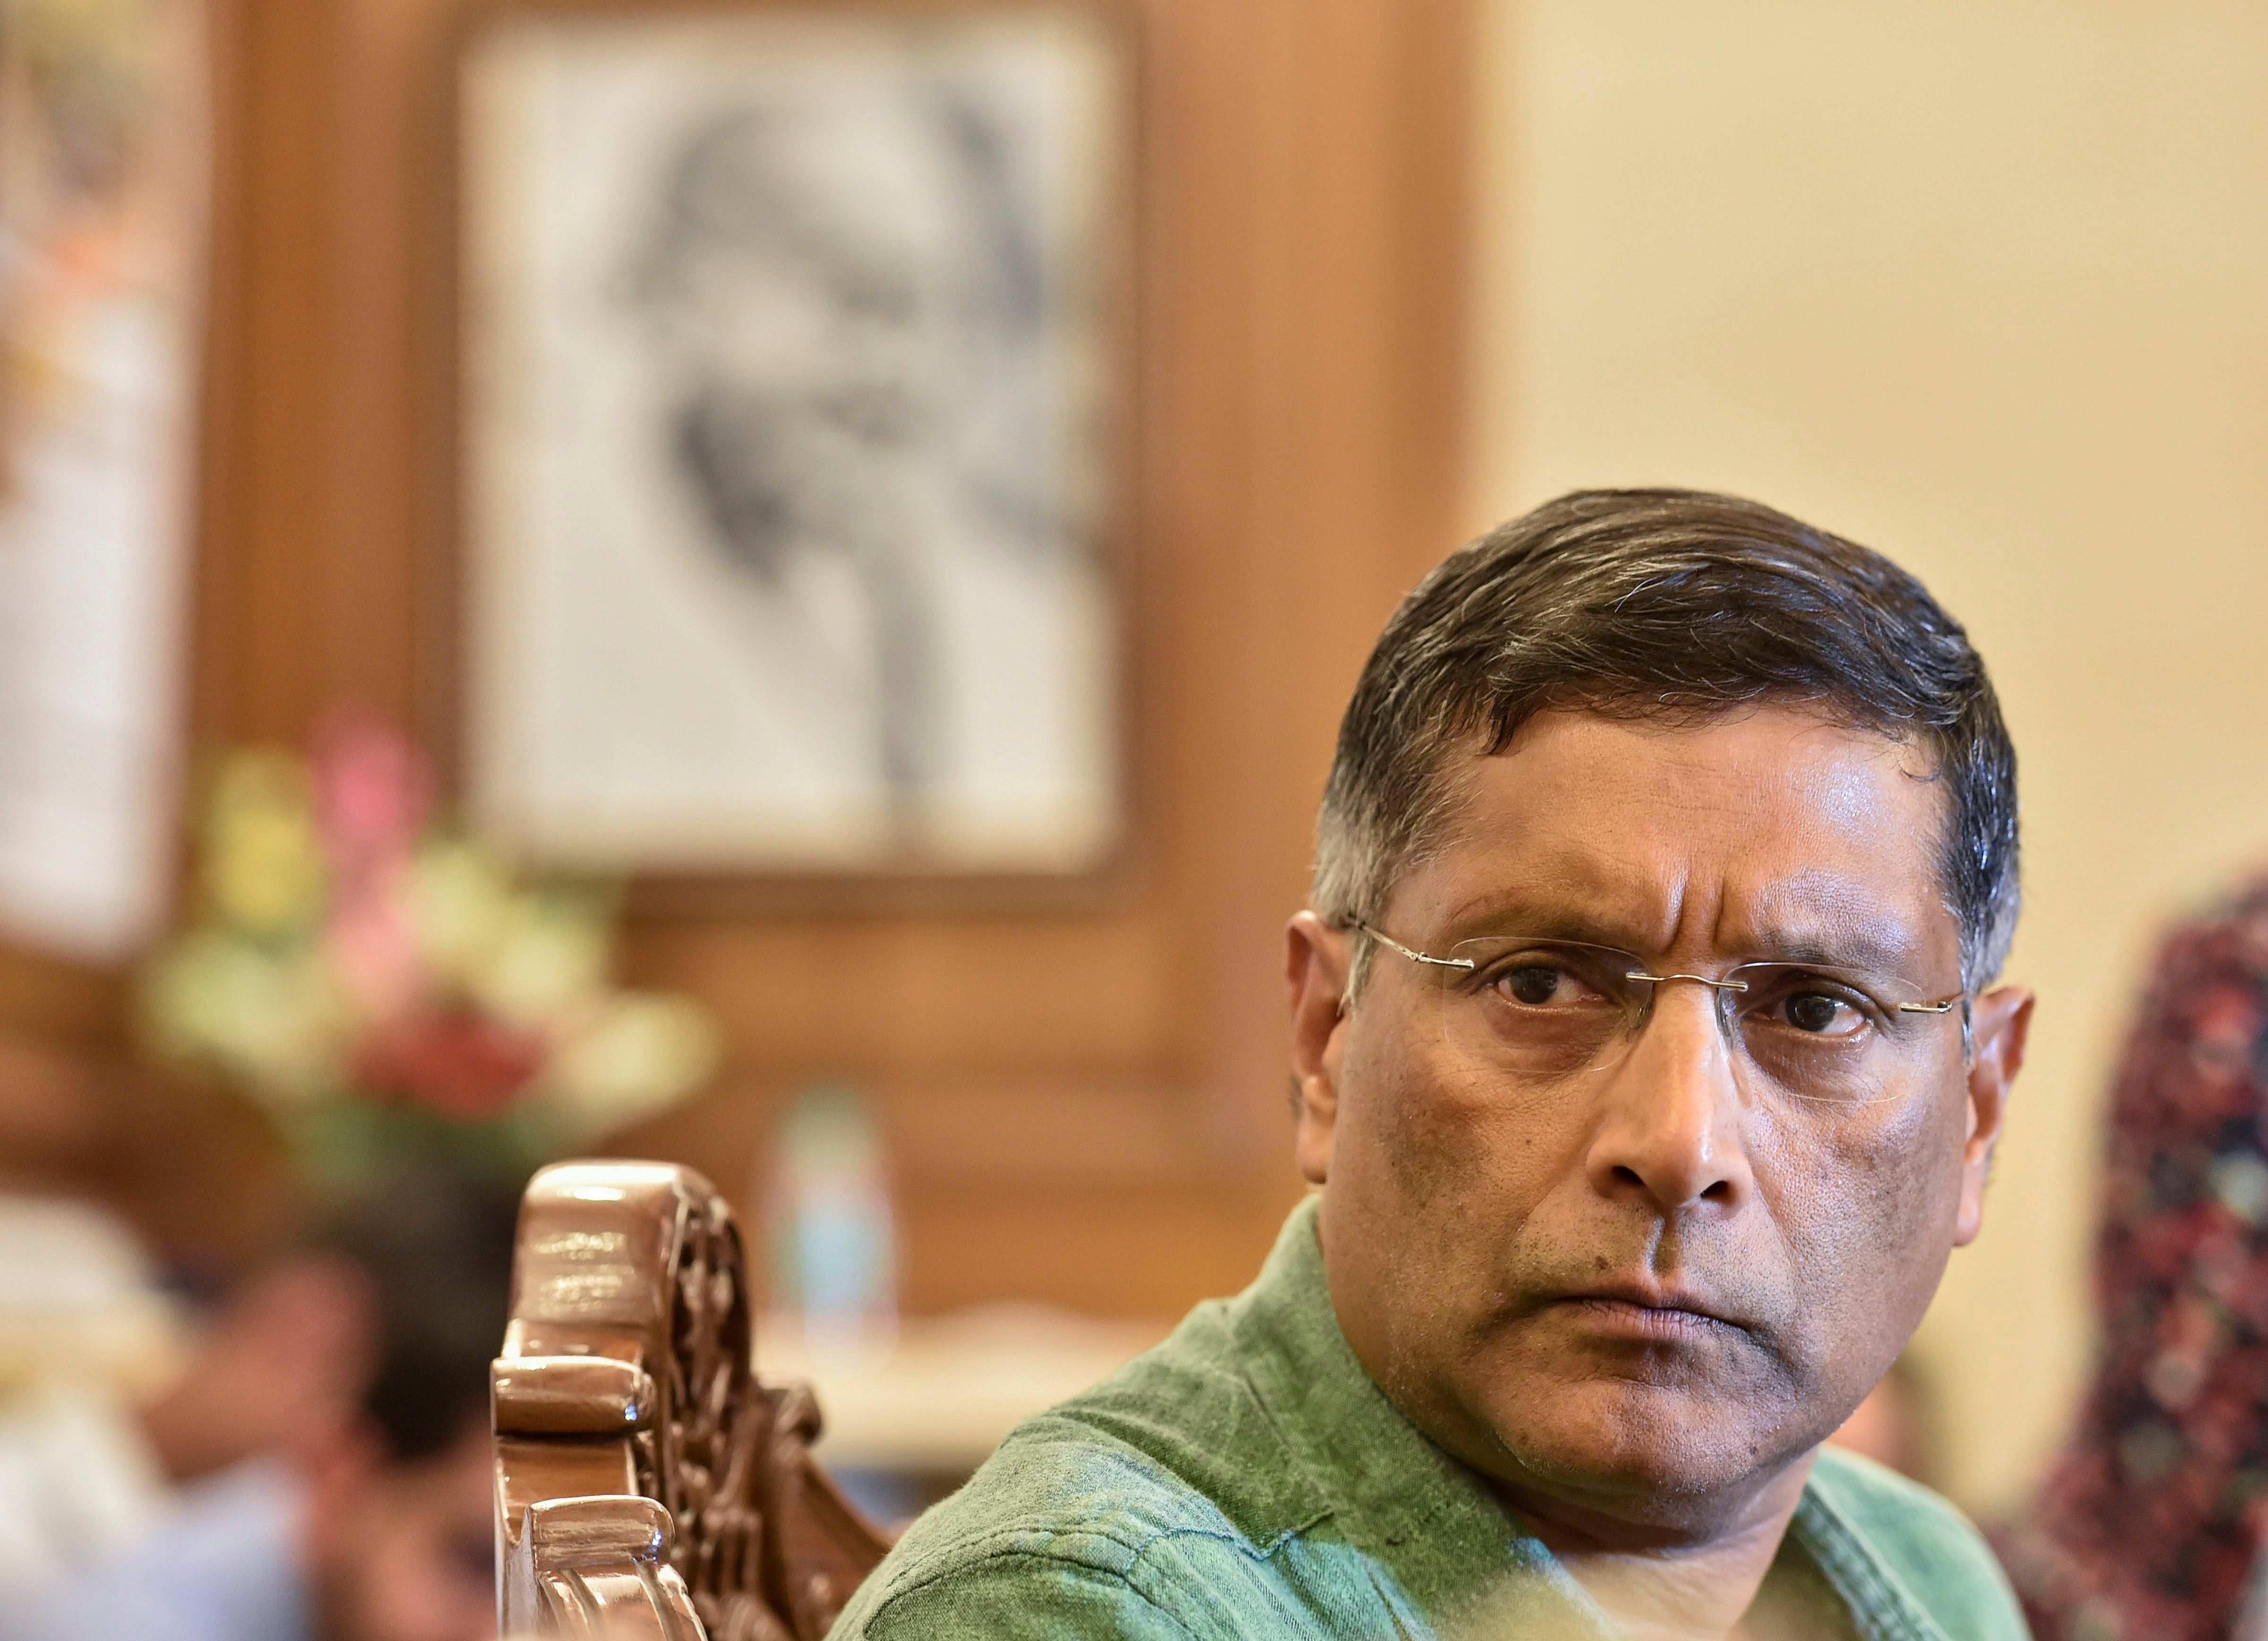 He said Rs 1-1.5 lakh crore could be mobilised by cutting expenditure, while another Rs 1-1.5 lakh crore could be raised from multilateral institutions and NRIs. (Credit: PTI Photo)